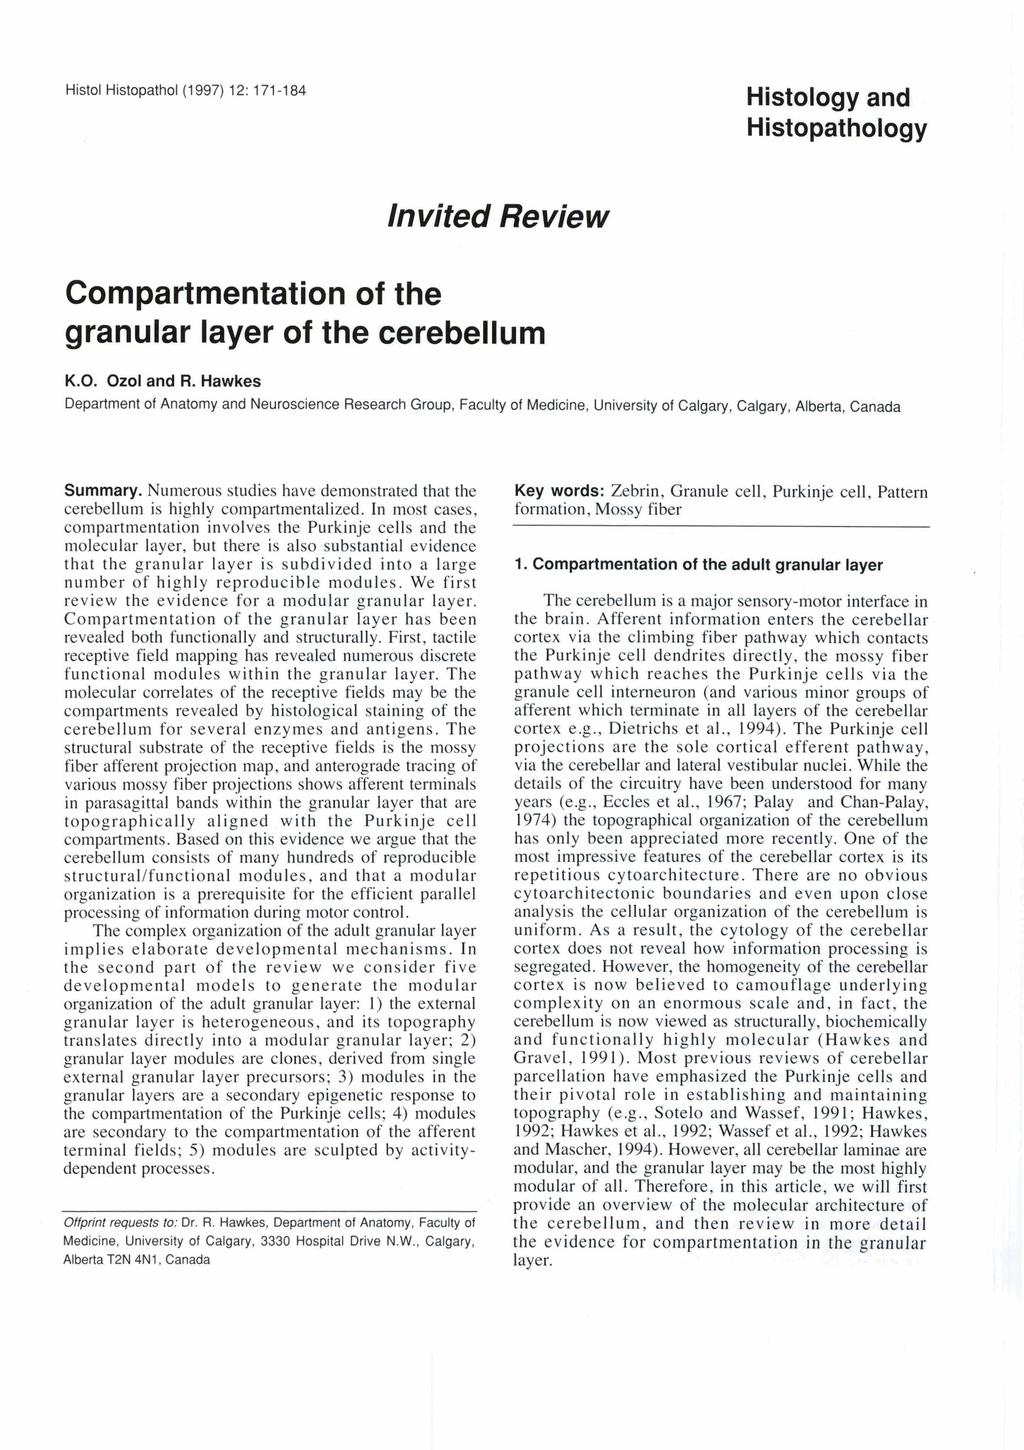 Histol Histopathol (1 997) 12: 171-1 84 Histology and Histopathology ln vited Re vie w Compartmentation of the granular layer of the cerebellum K.O. Ozol and R.